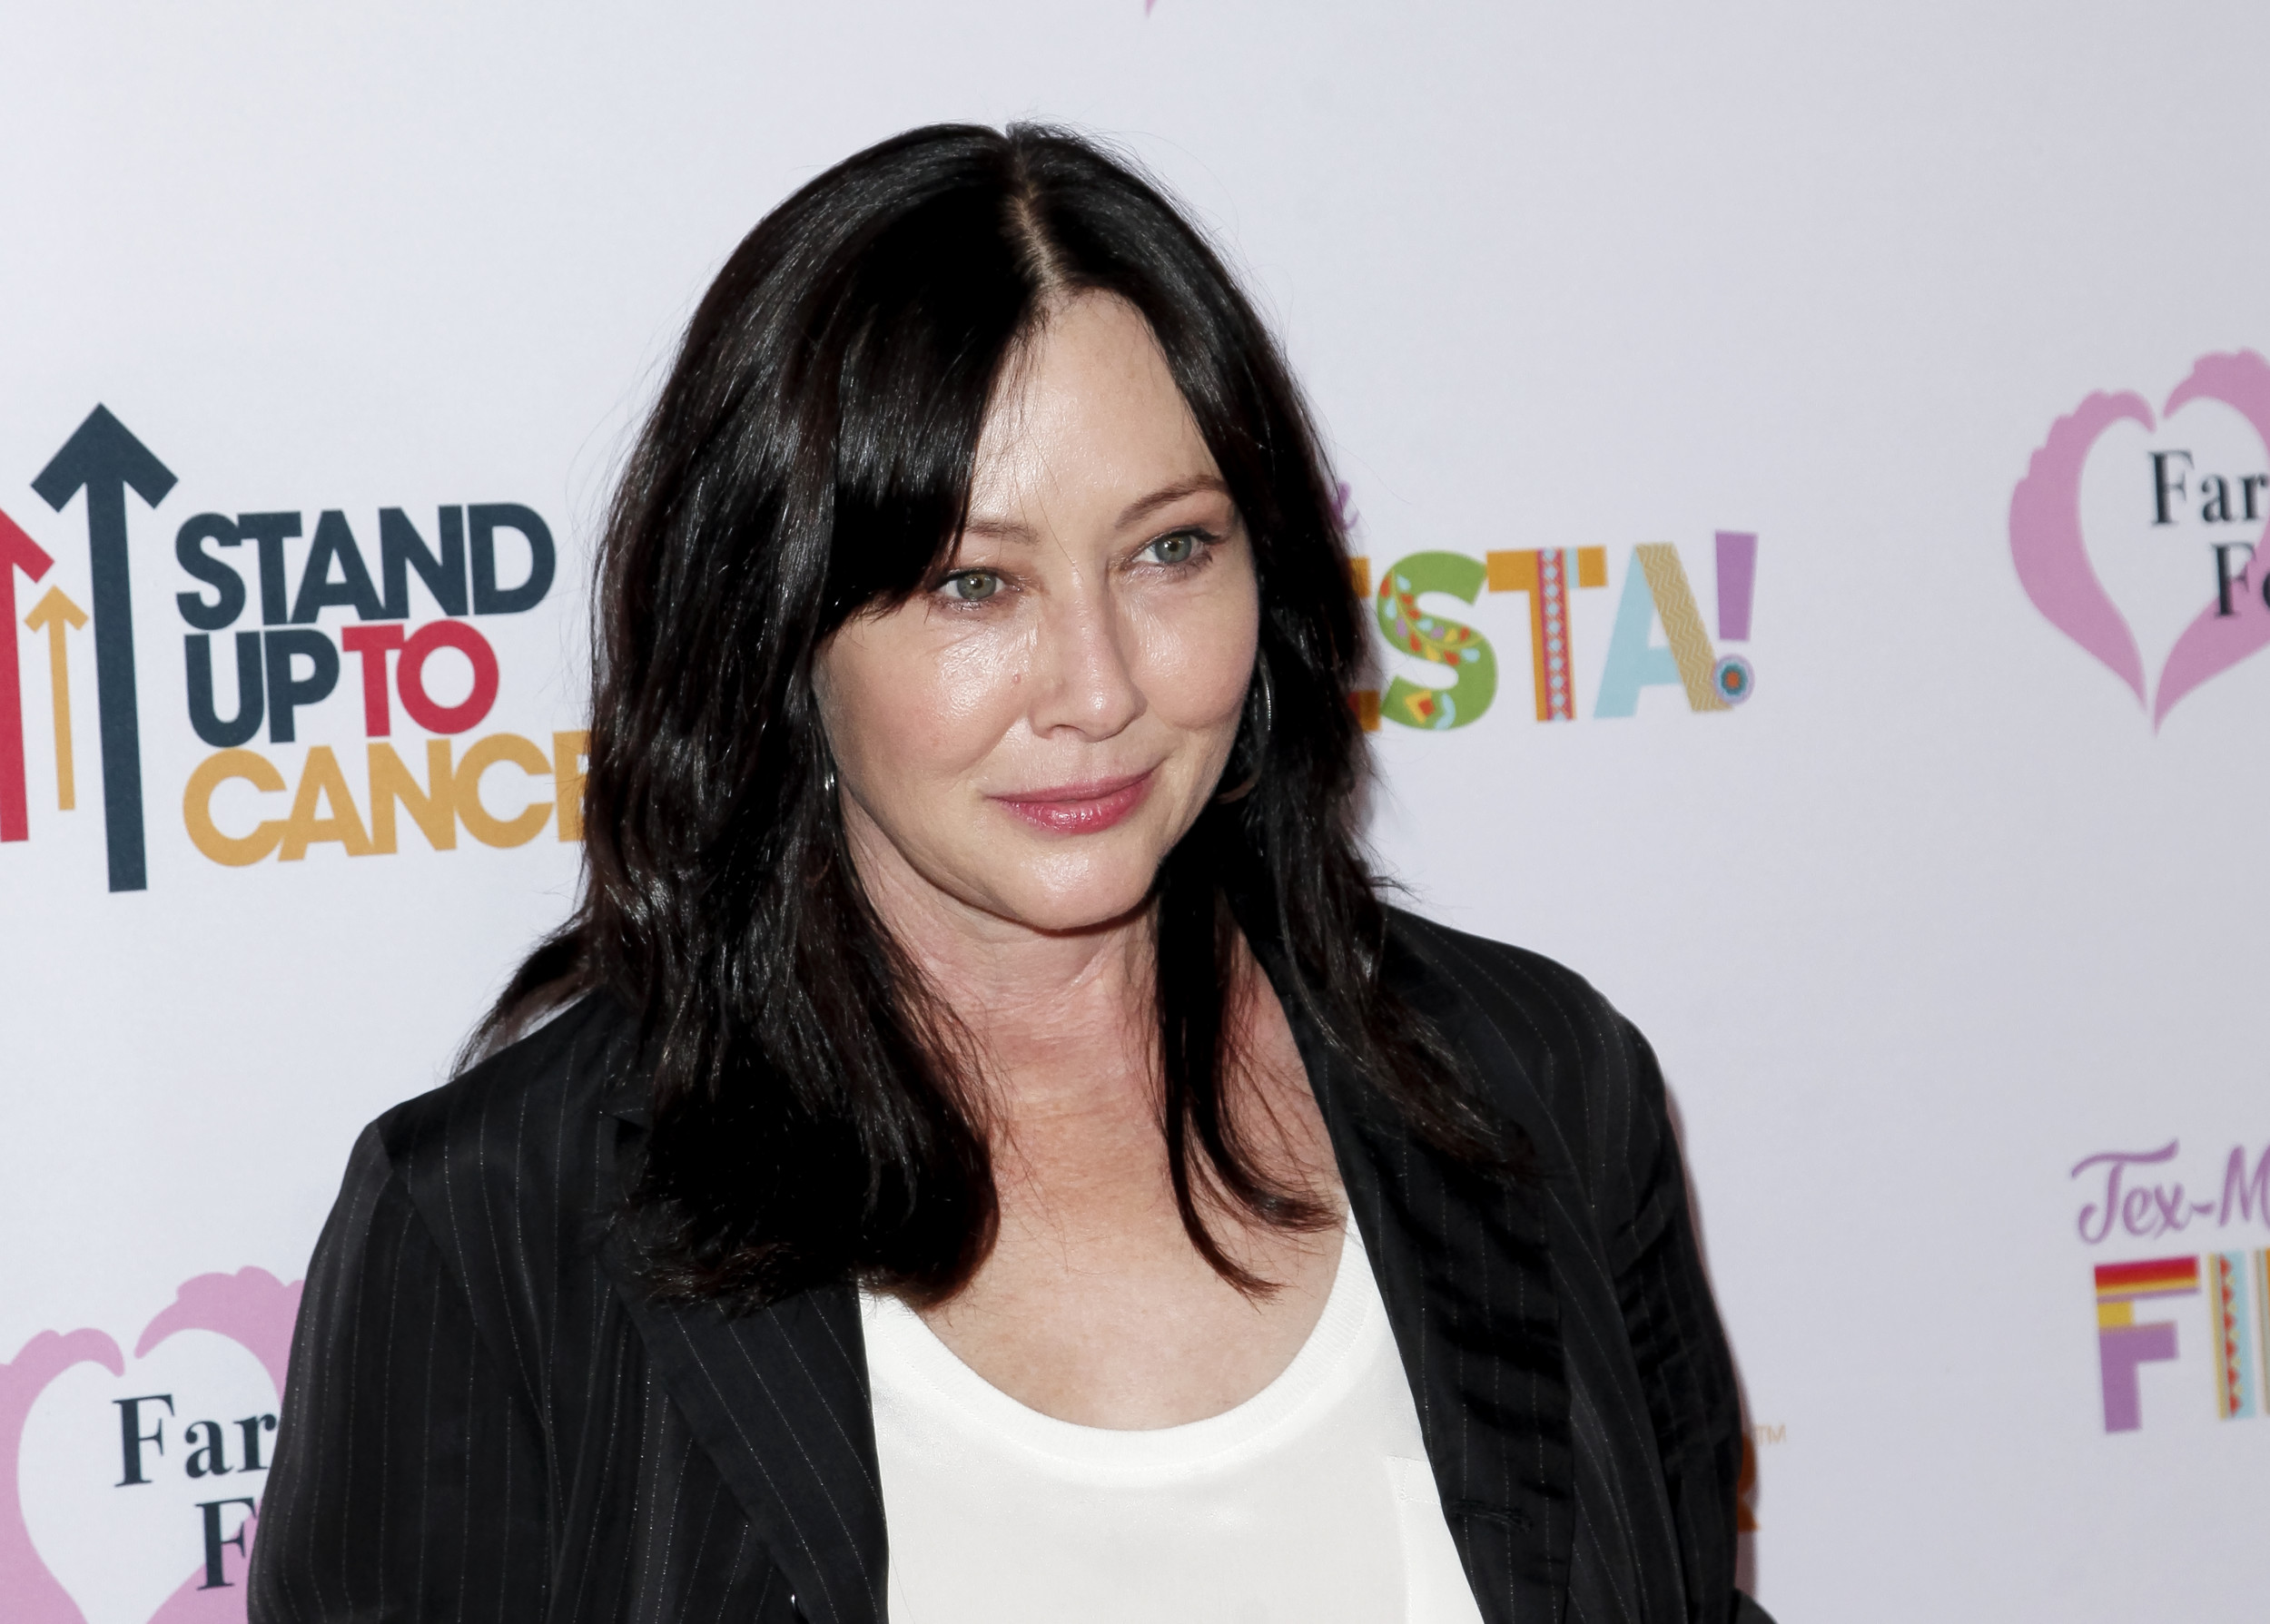 The only thing Shannen Doherty did the day before she died